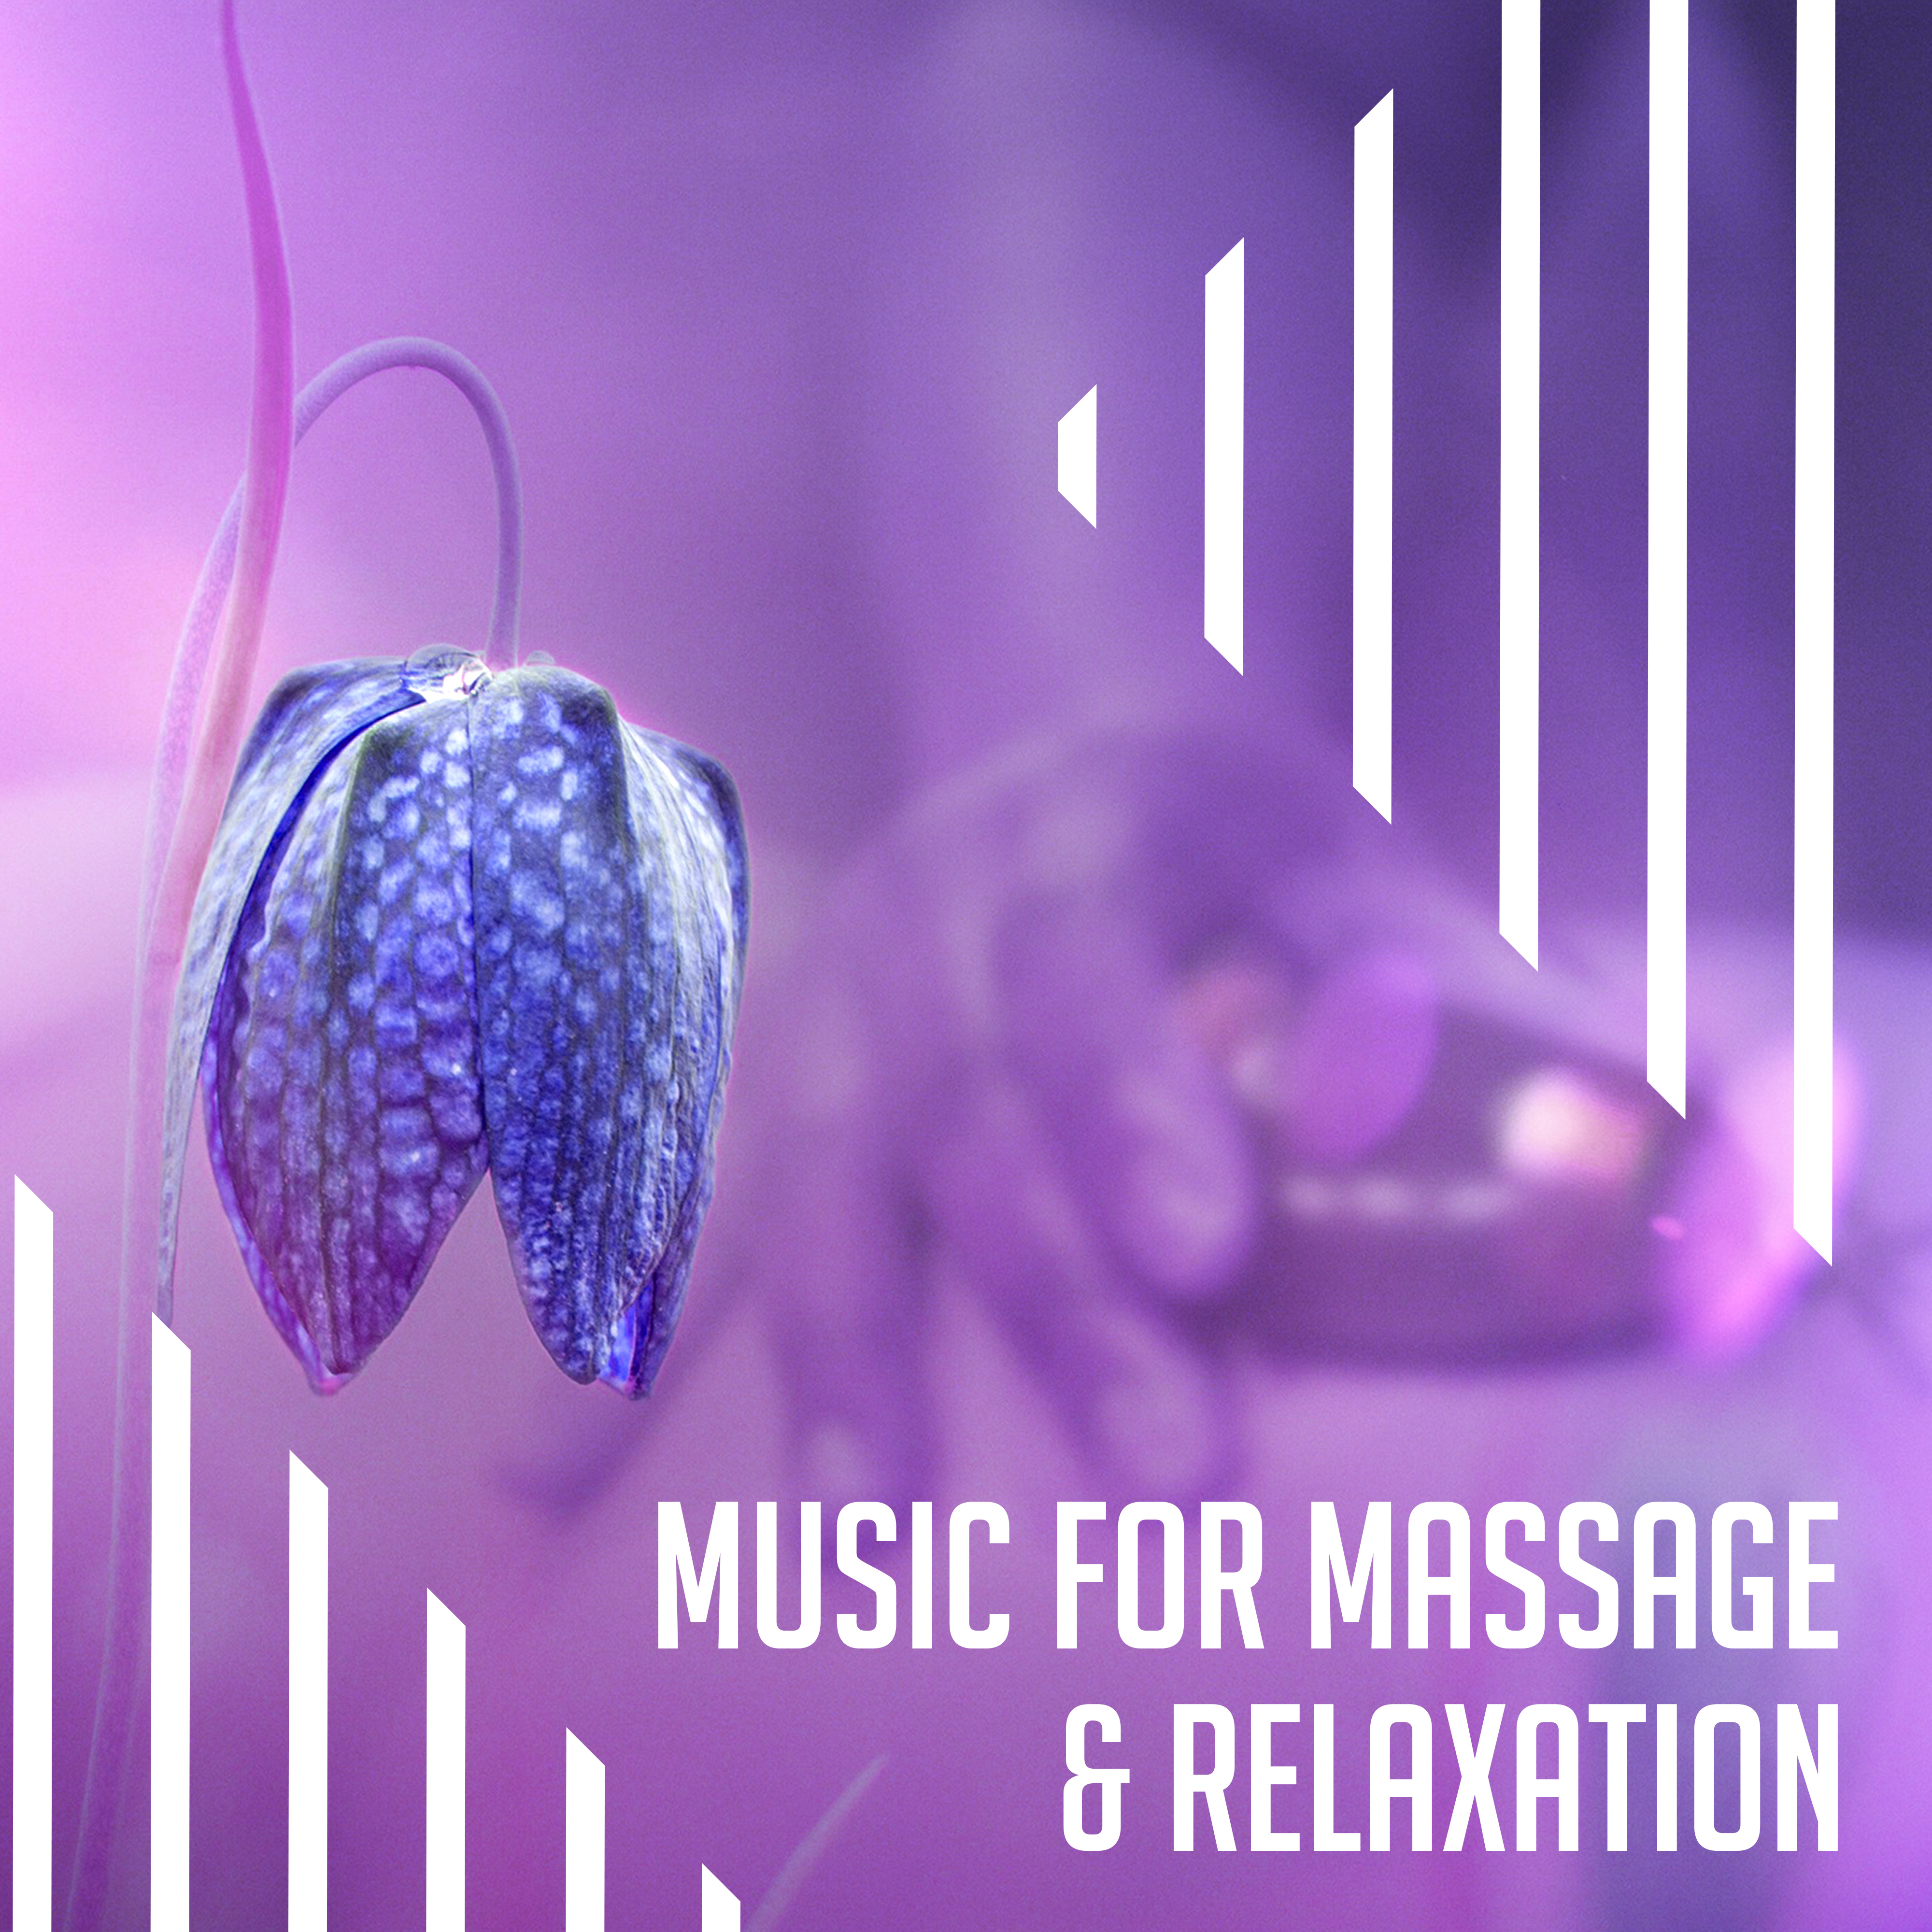 Music for Massage & Relaxation – Spa Dreams, Pure Mind, Healing Sounds, Bliss Spa, Wellness, Zen, Deep Relief, Calm Down, Music for Spa